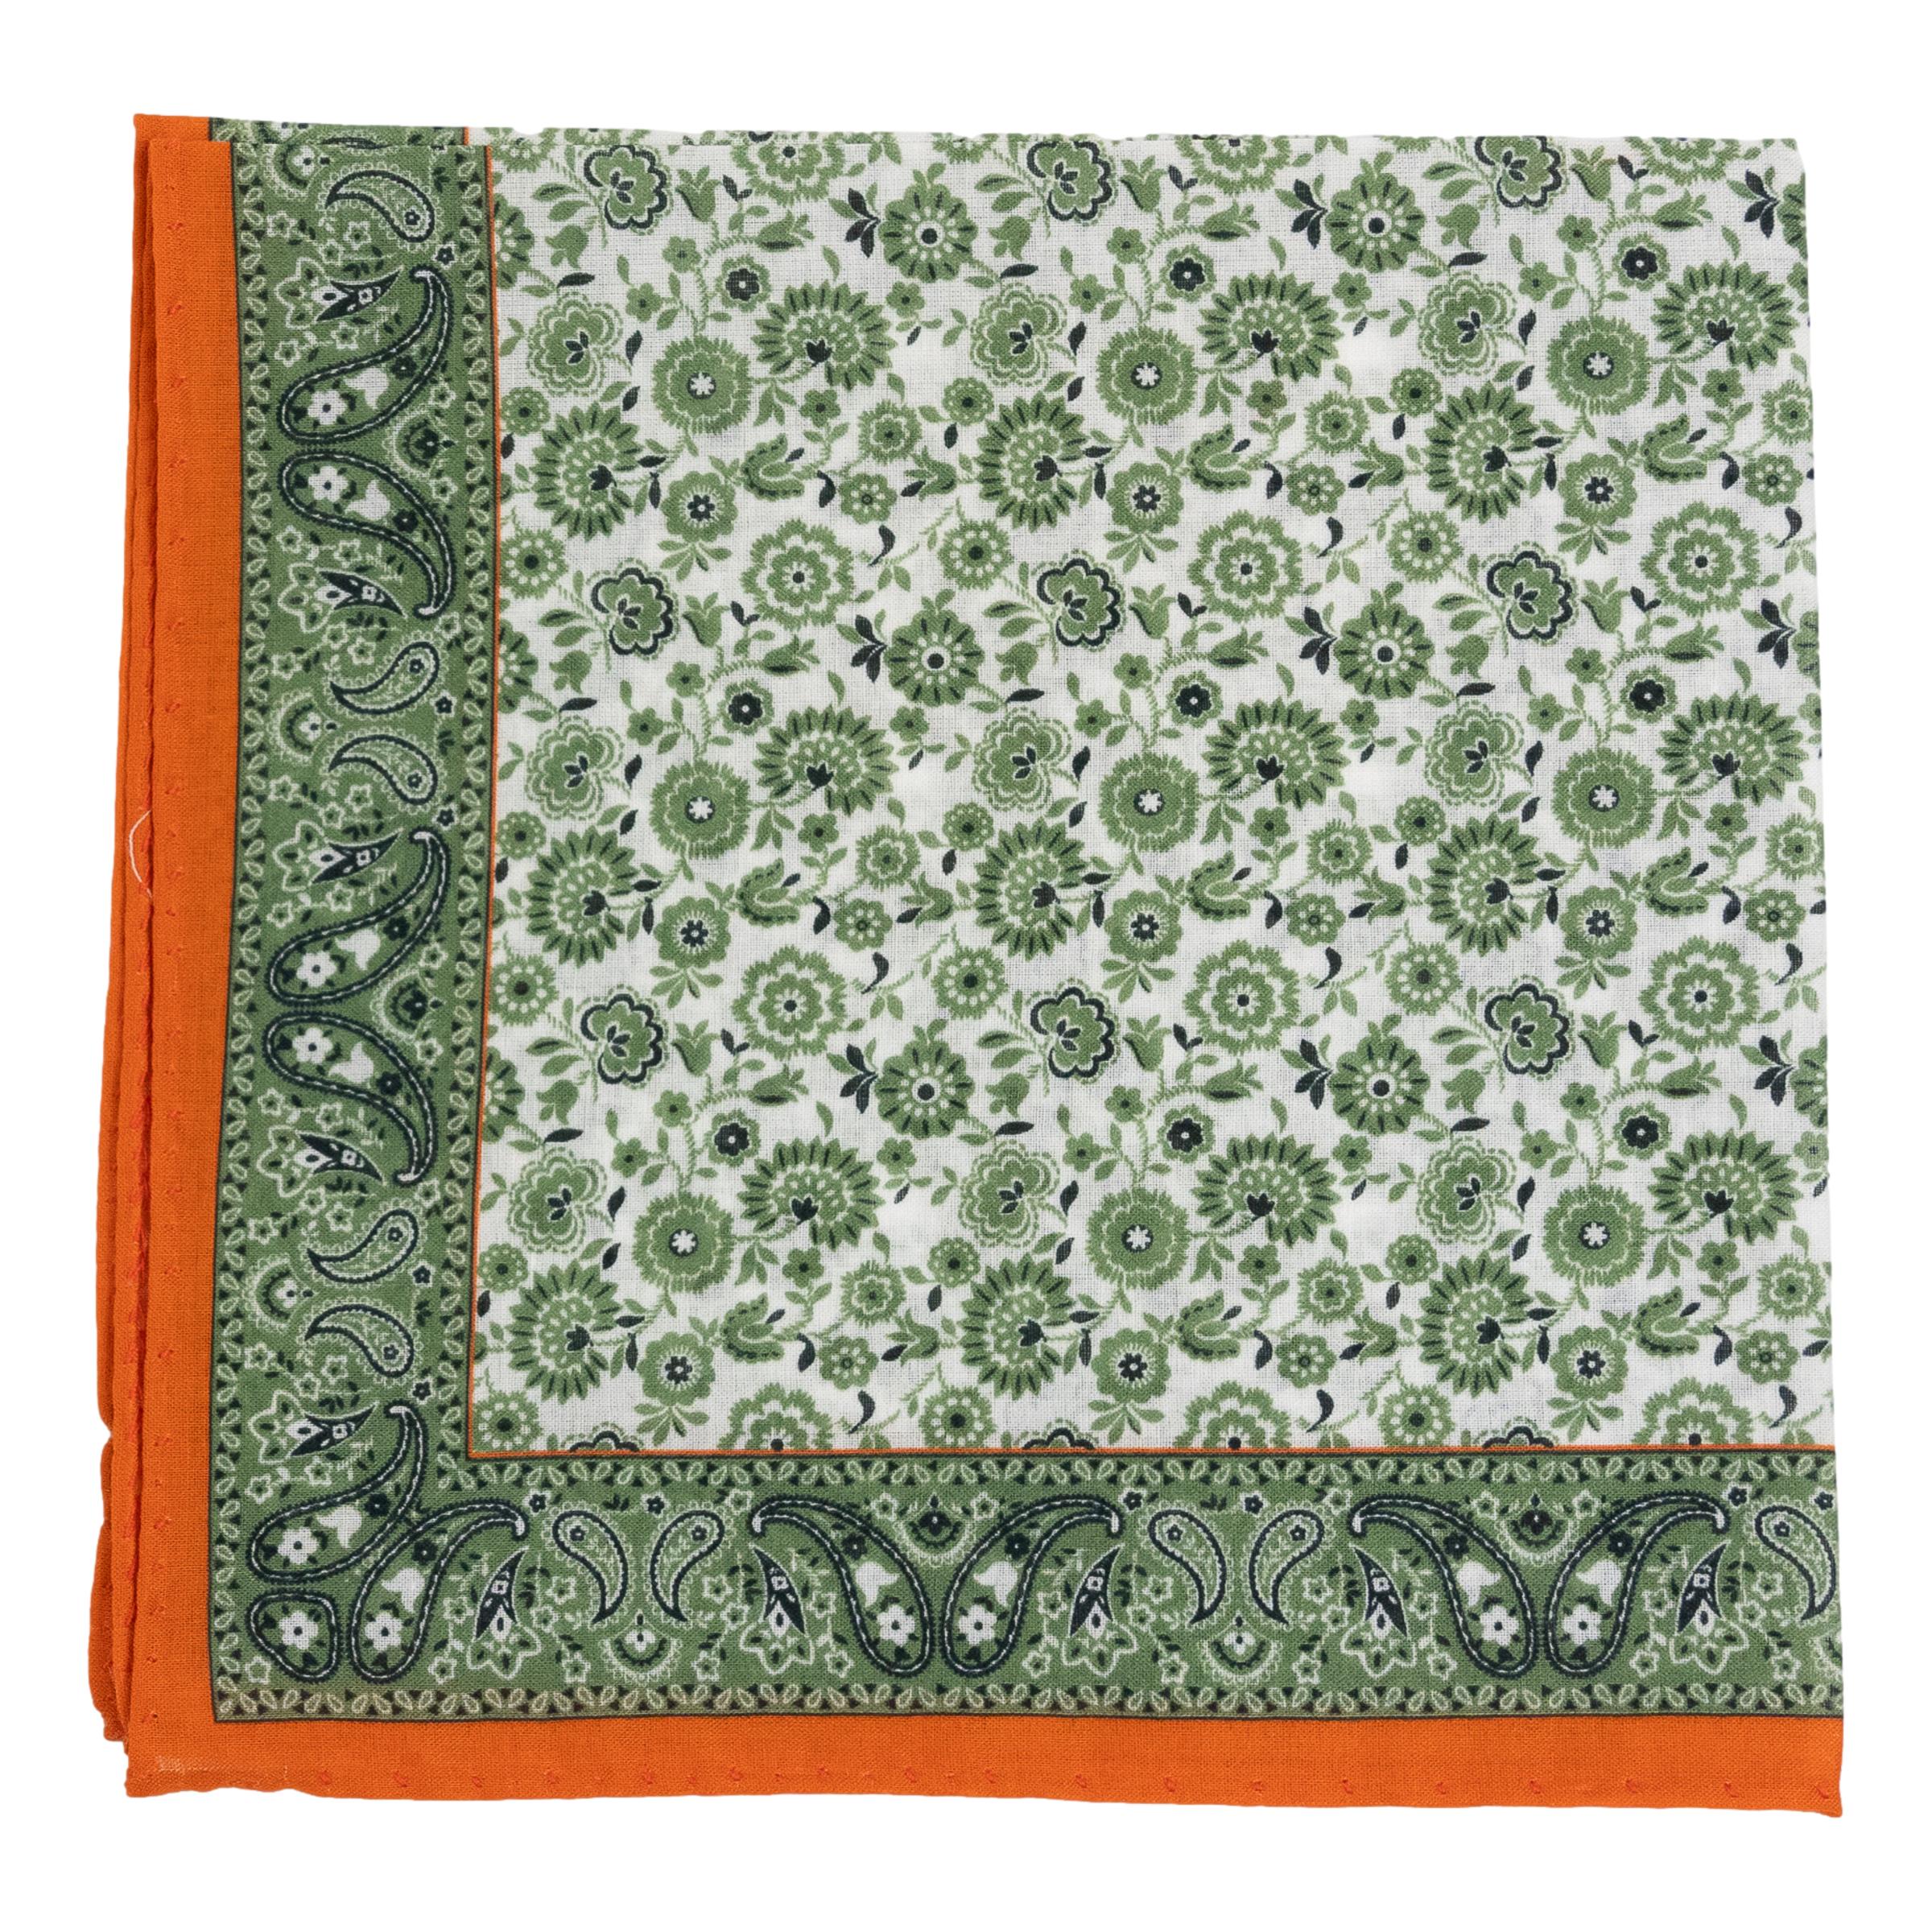 Floral Pattern with Paisley Border Fine Cotton Pocket Square